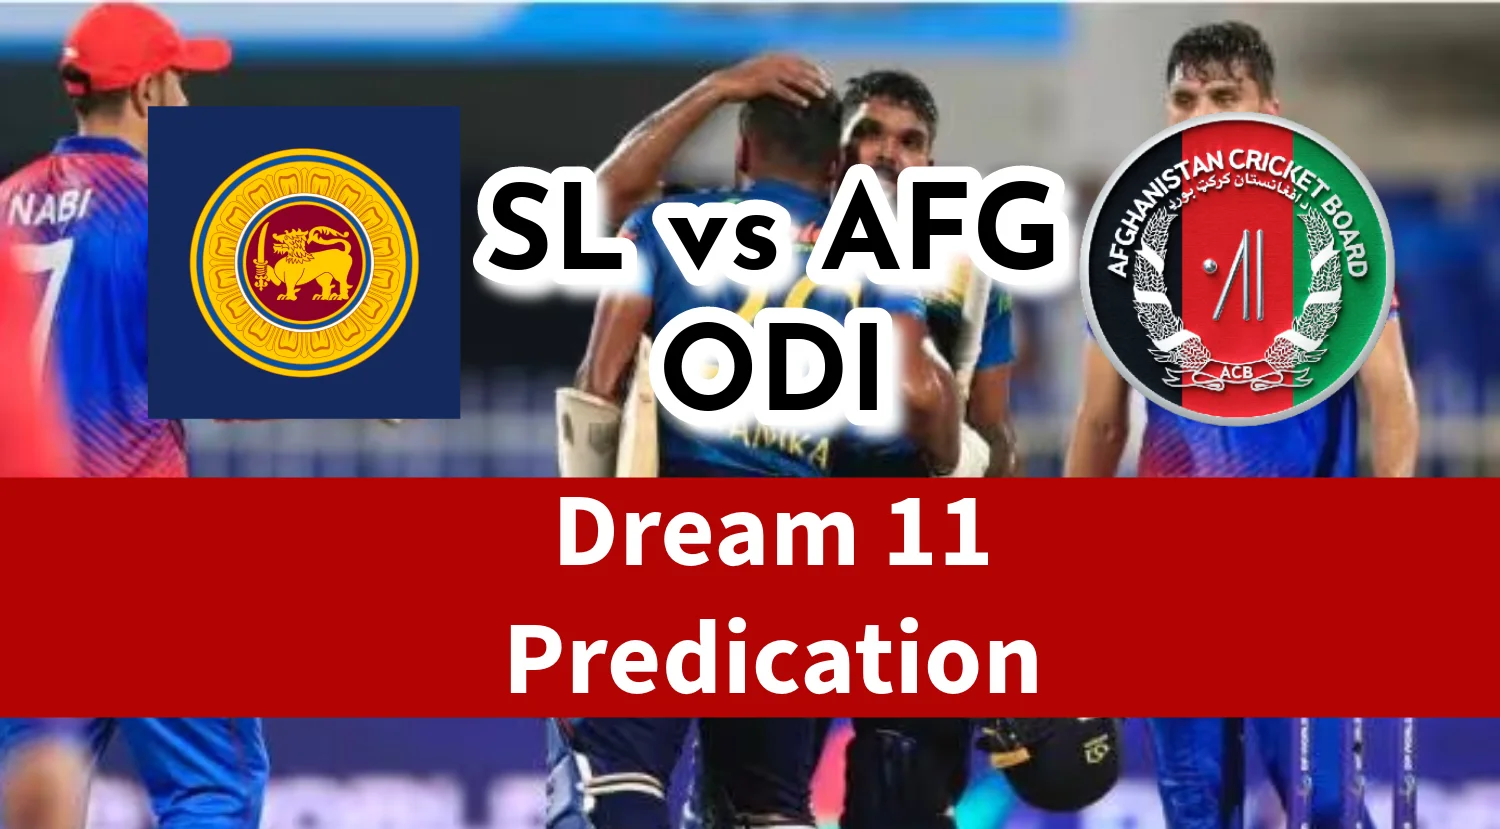 SL vs AFG 1ST ODI Dream 11 Predication-Check Sri Lanka vs Afghanistan Playing XI, Pitch Report and Weather Report Now